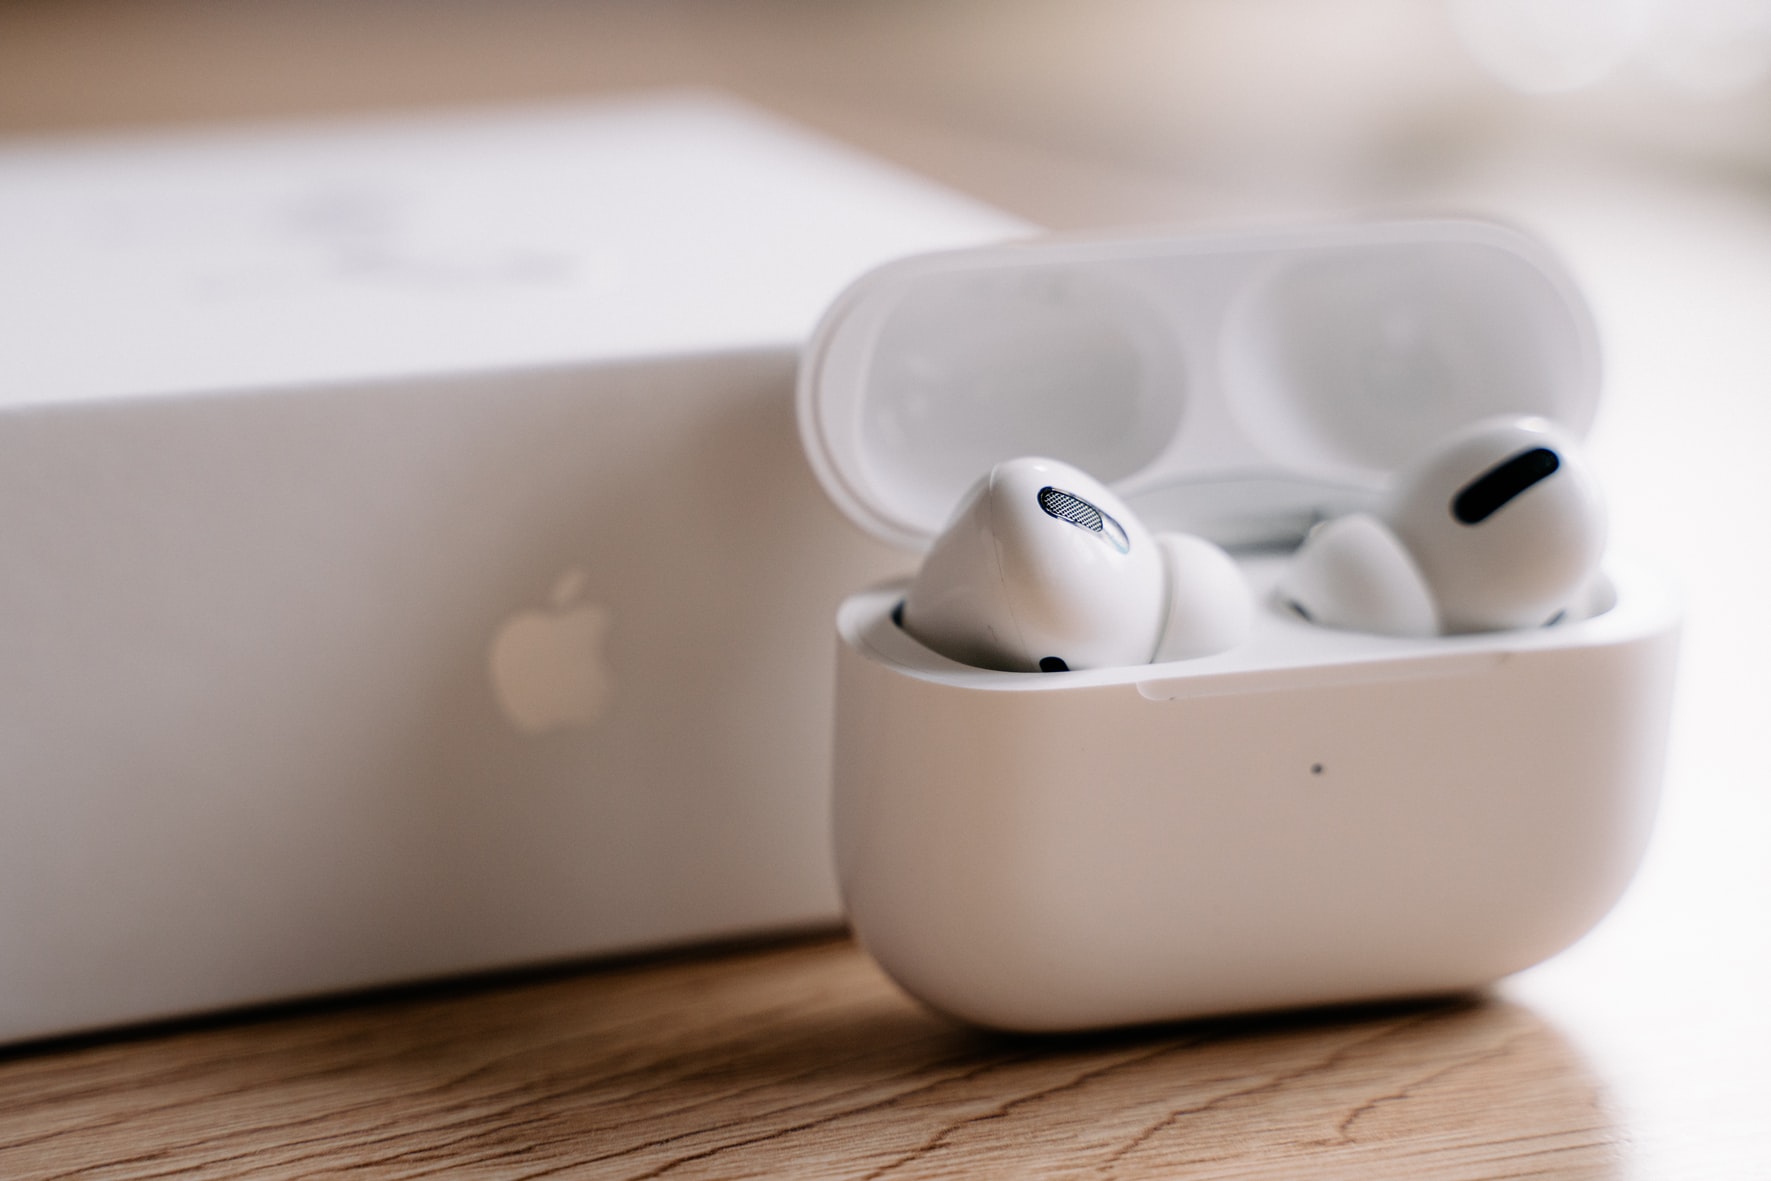 Apple AirPods Pro 2 remain on track for a 2022 as rumours emerge of low AirPods 3 demand and poor sales - NotebookCheck.net News